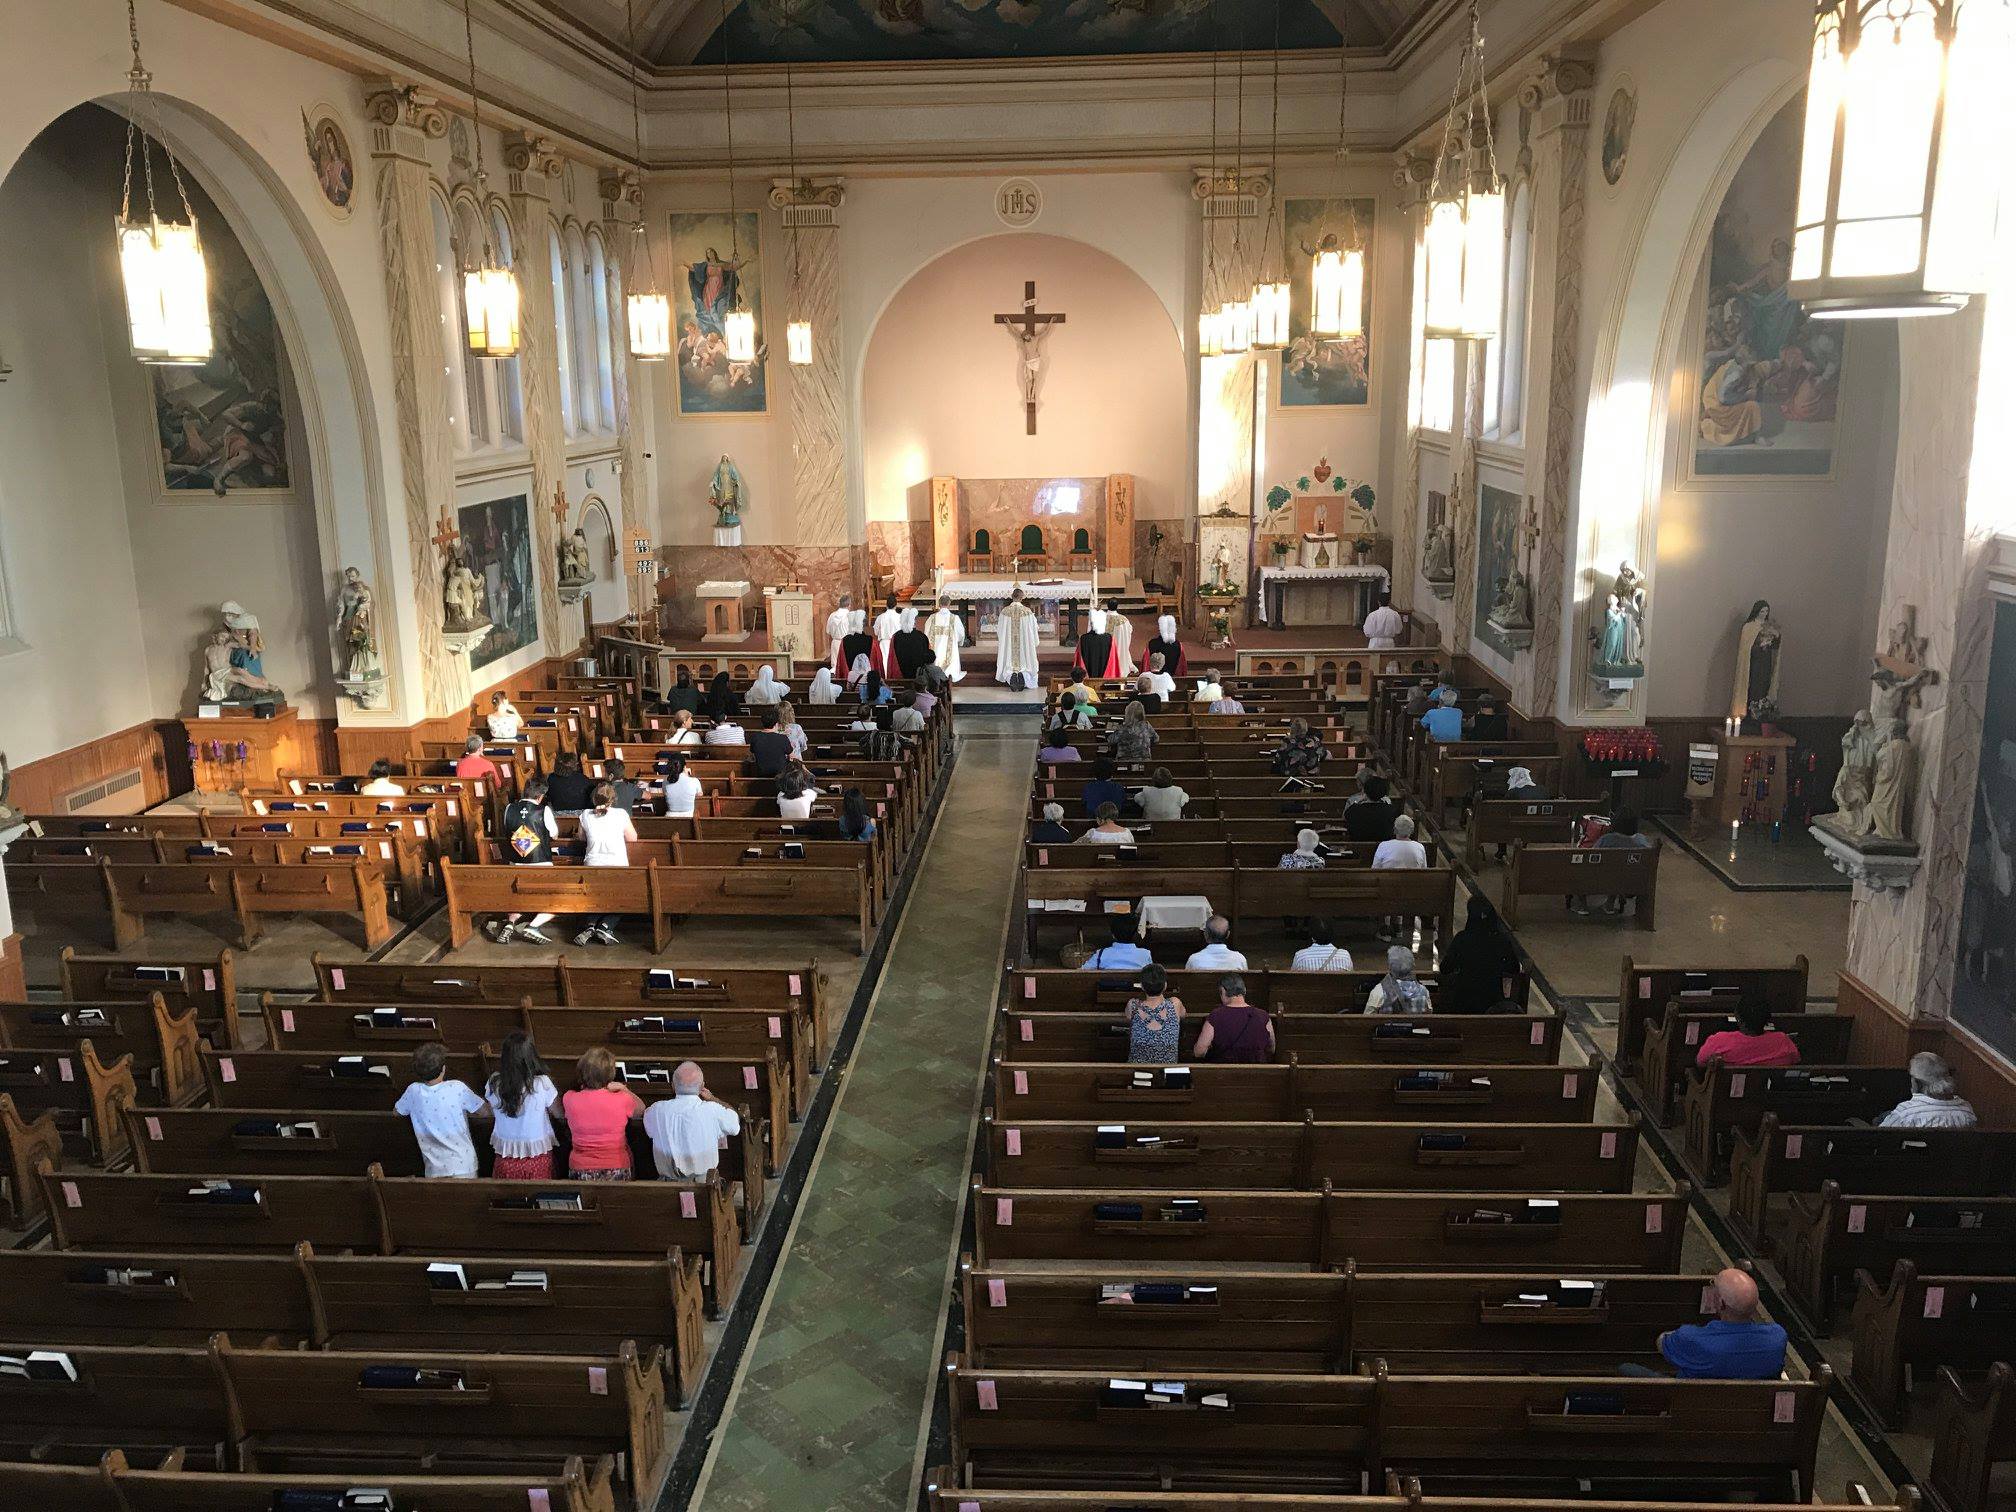 photo of st. anns during adoation taken from the choir loft. Father and other clergy kneeling at the front with a busy church of people kneeling